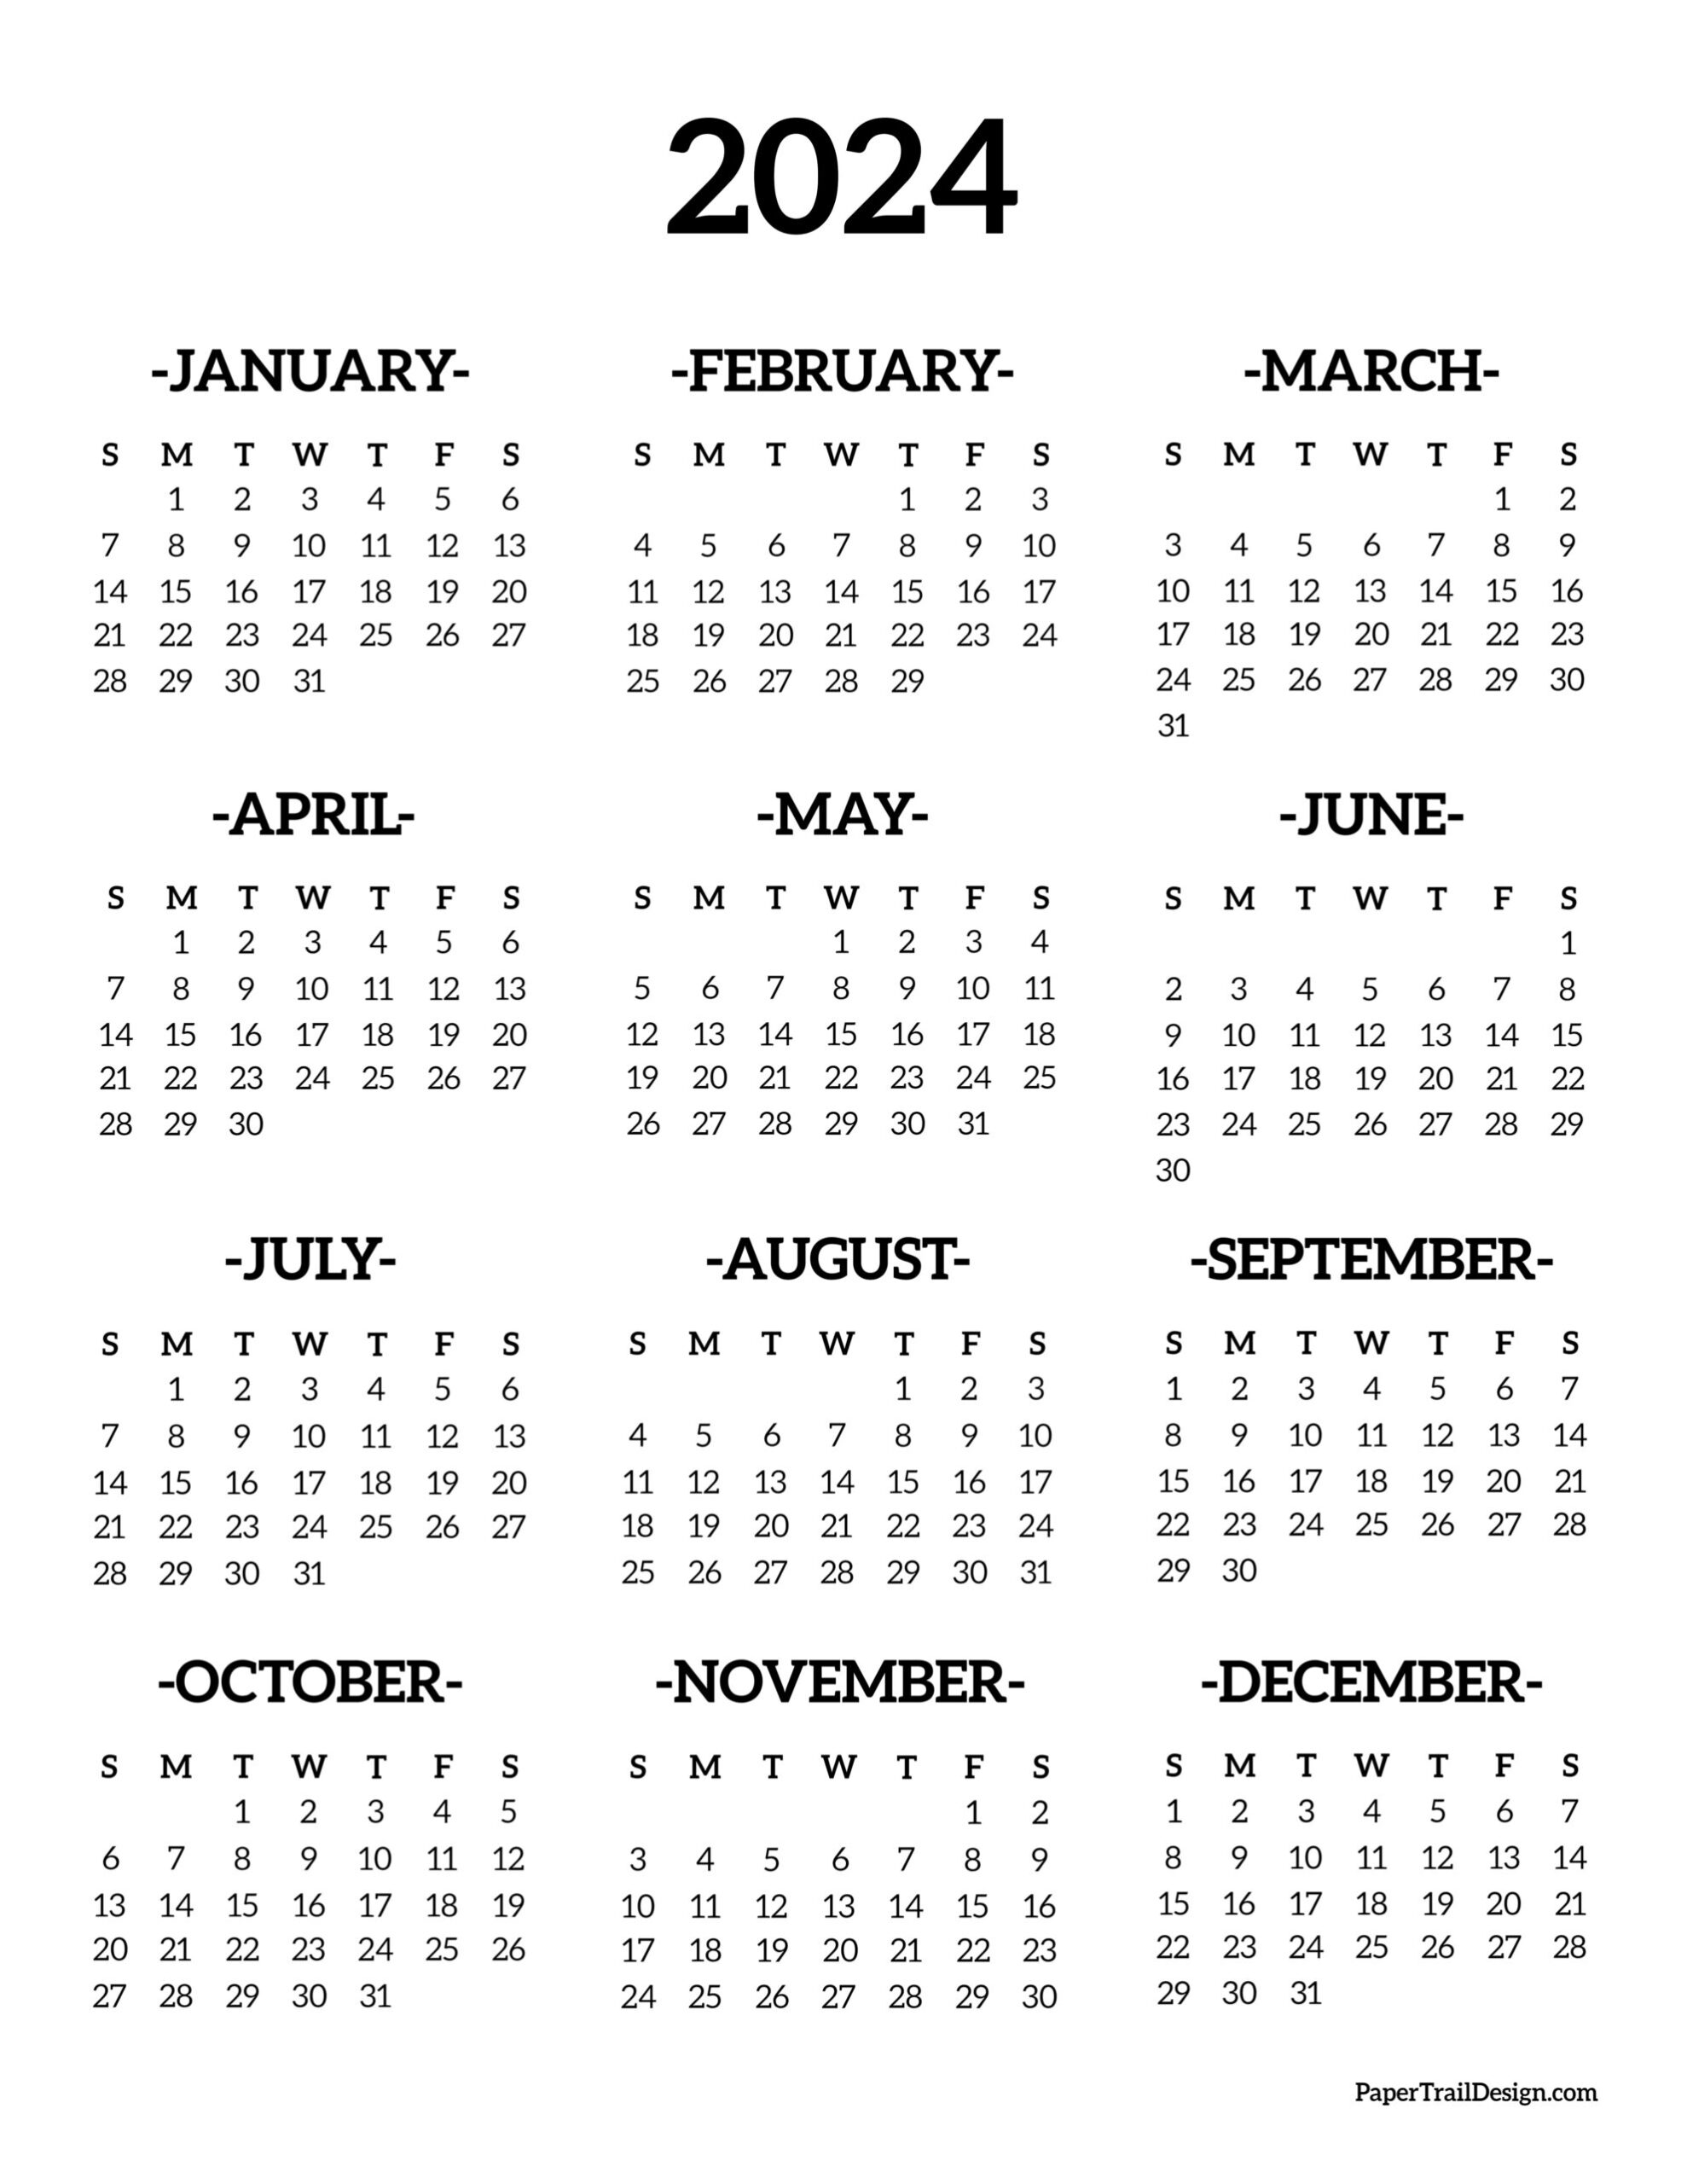 Calendar 2024 Printable One Page - Paper Trail Design for 2024 Printable Calendar One Page